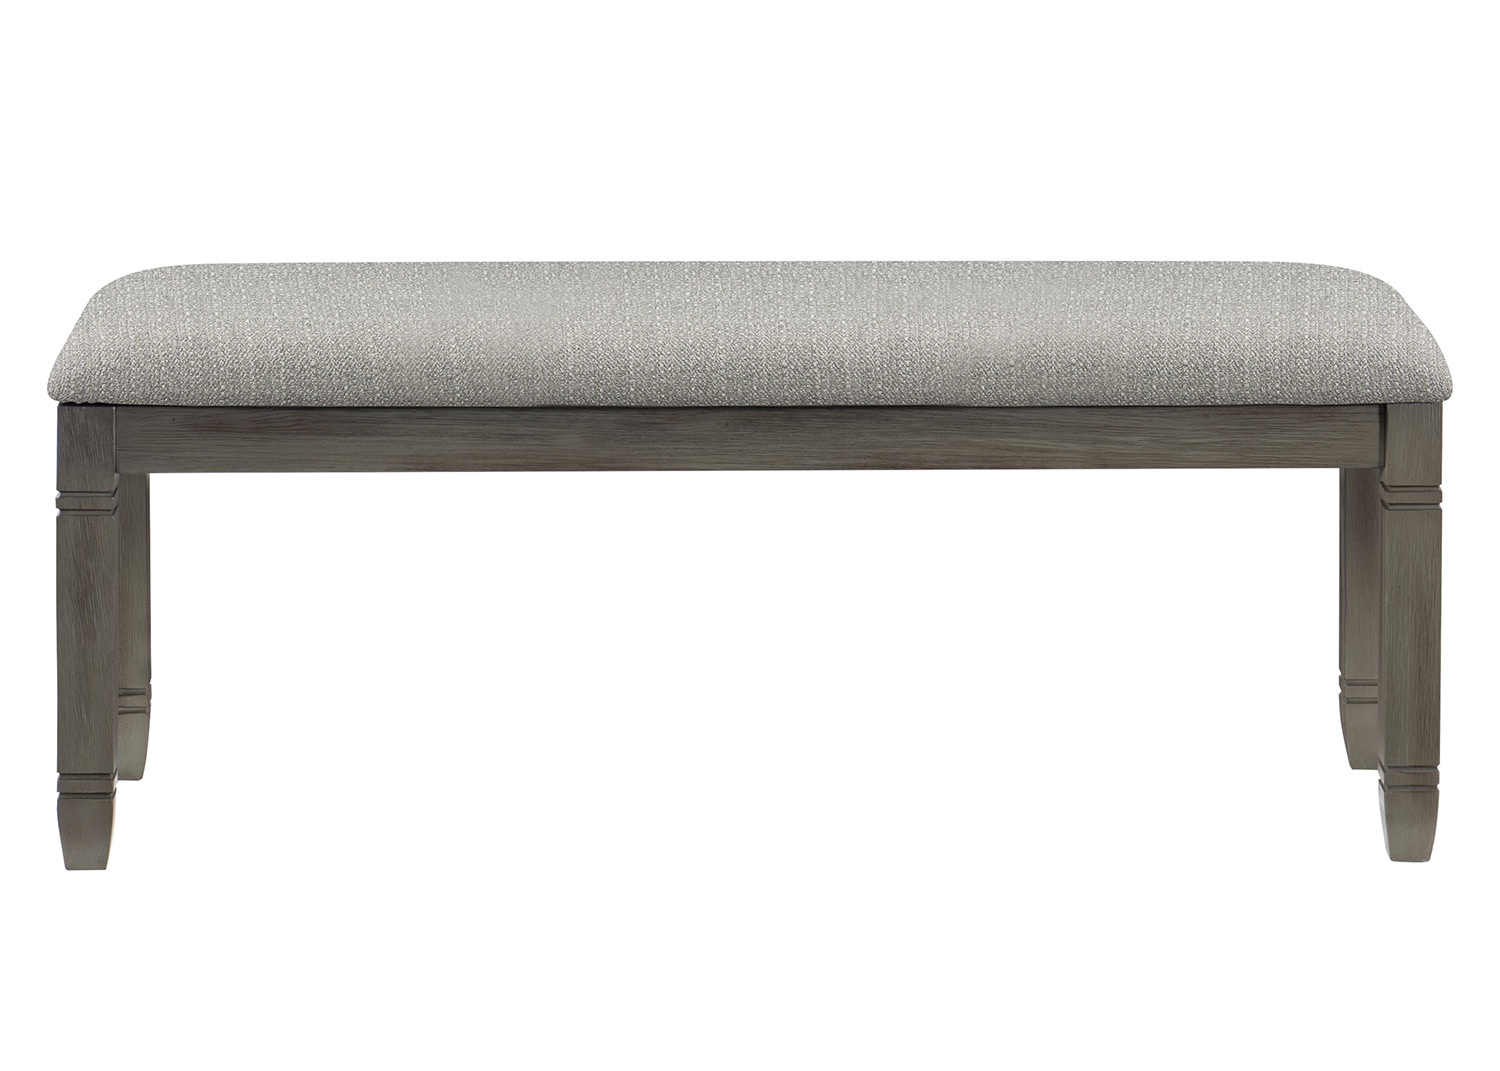 Homelegance Granby Bench - Antique Gray and Coffee